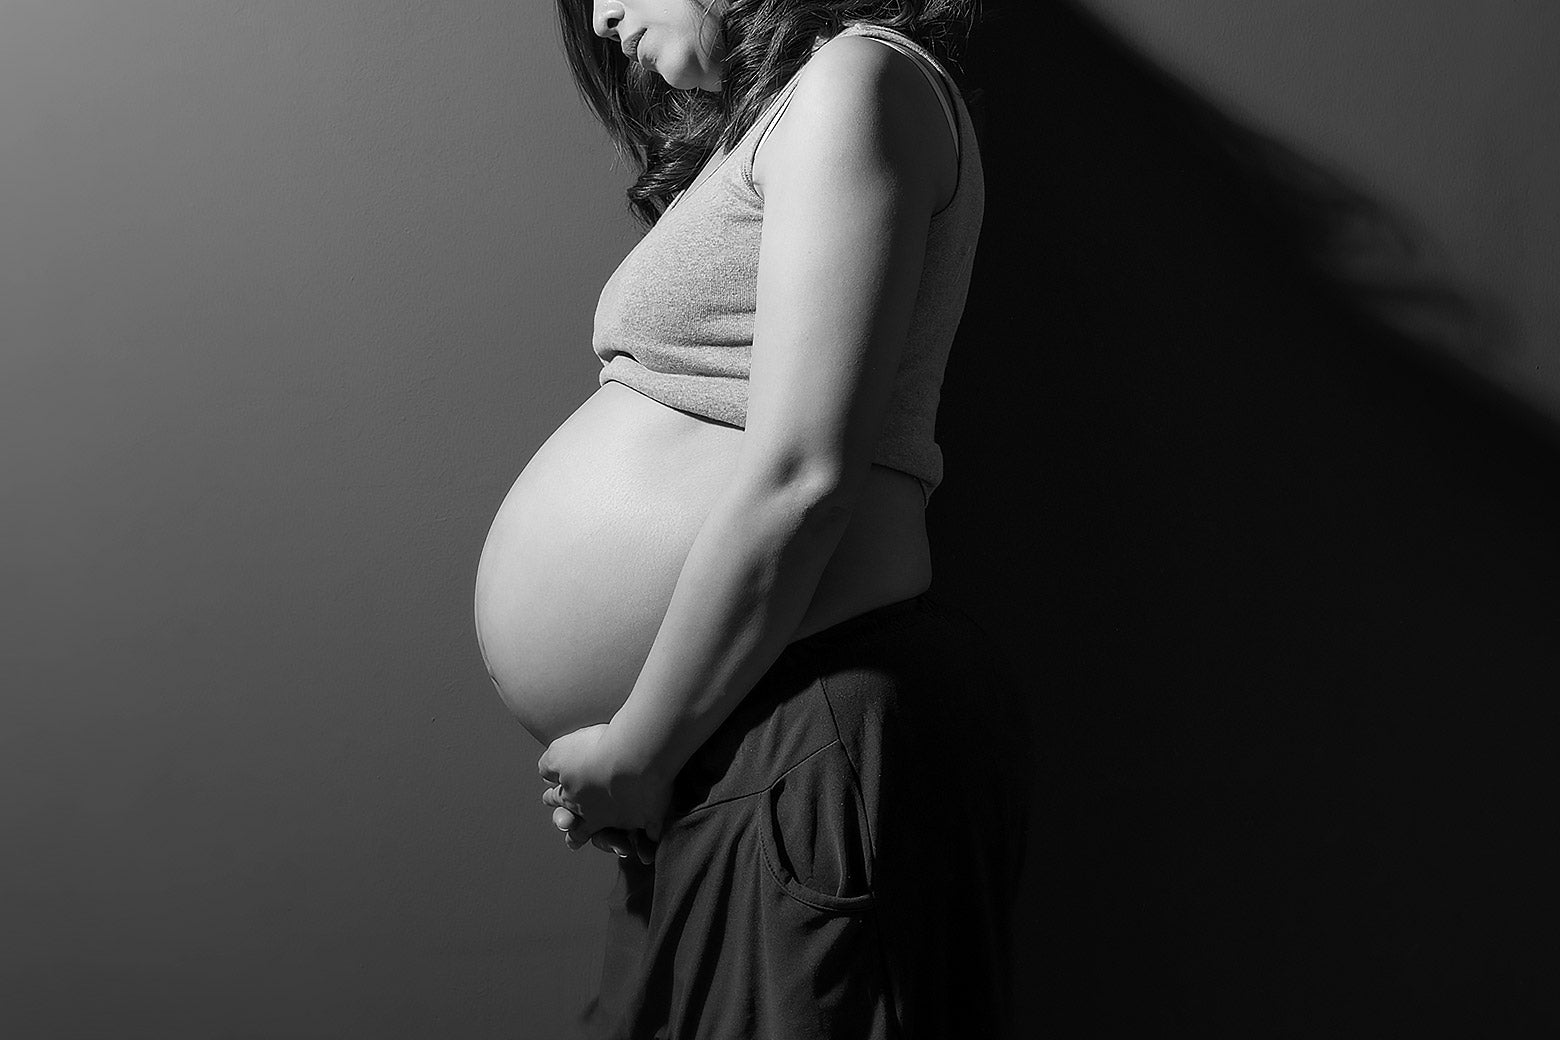 A lonely, pregnant woman leaning against a wall cradling her stomach.